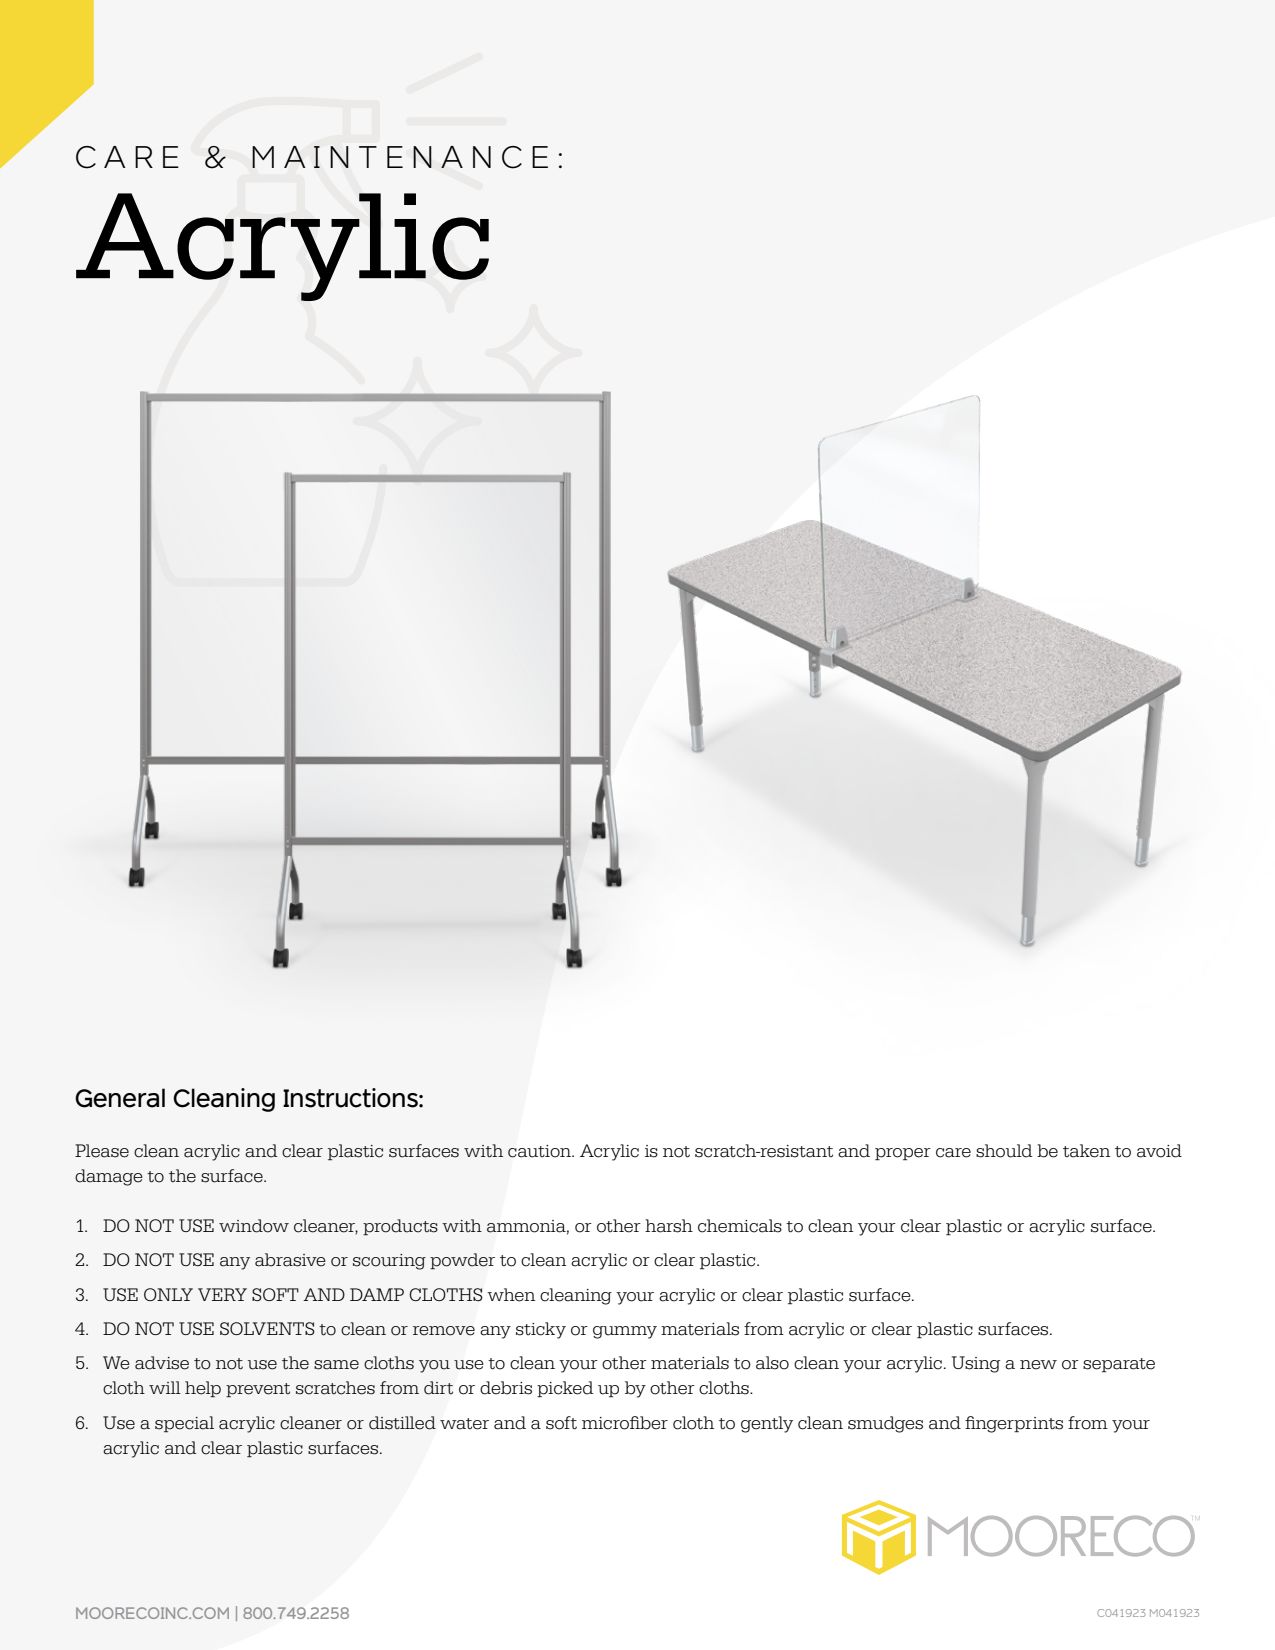 How to Care For Acrylic Surfaces